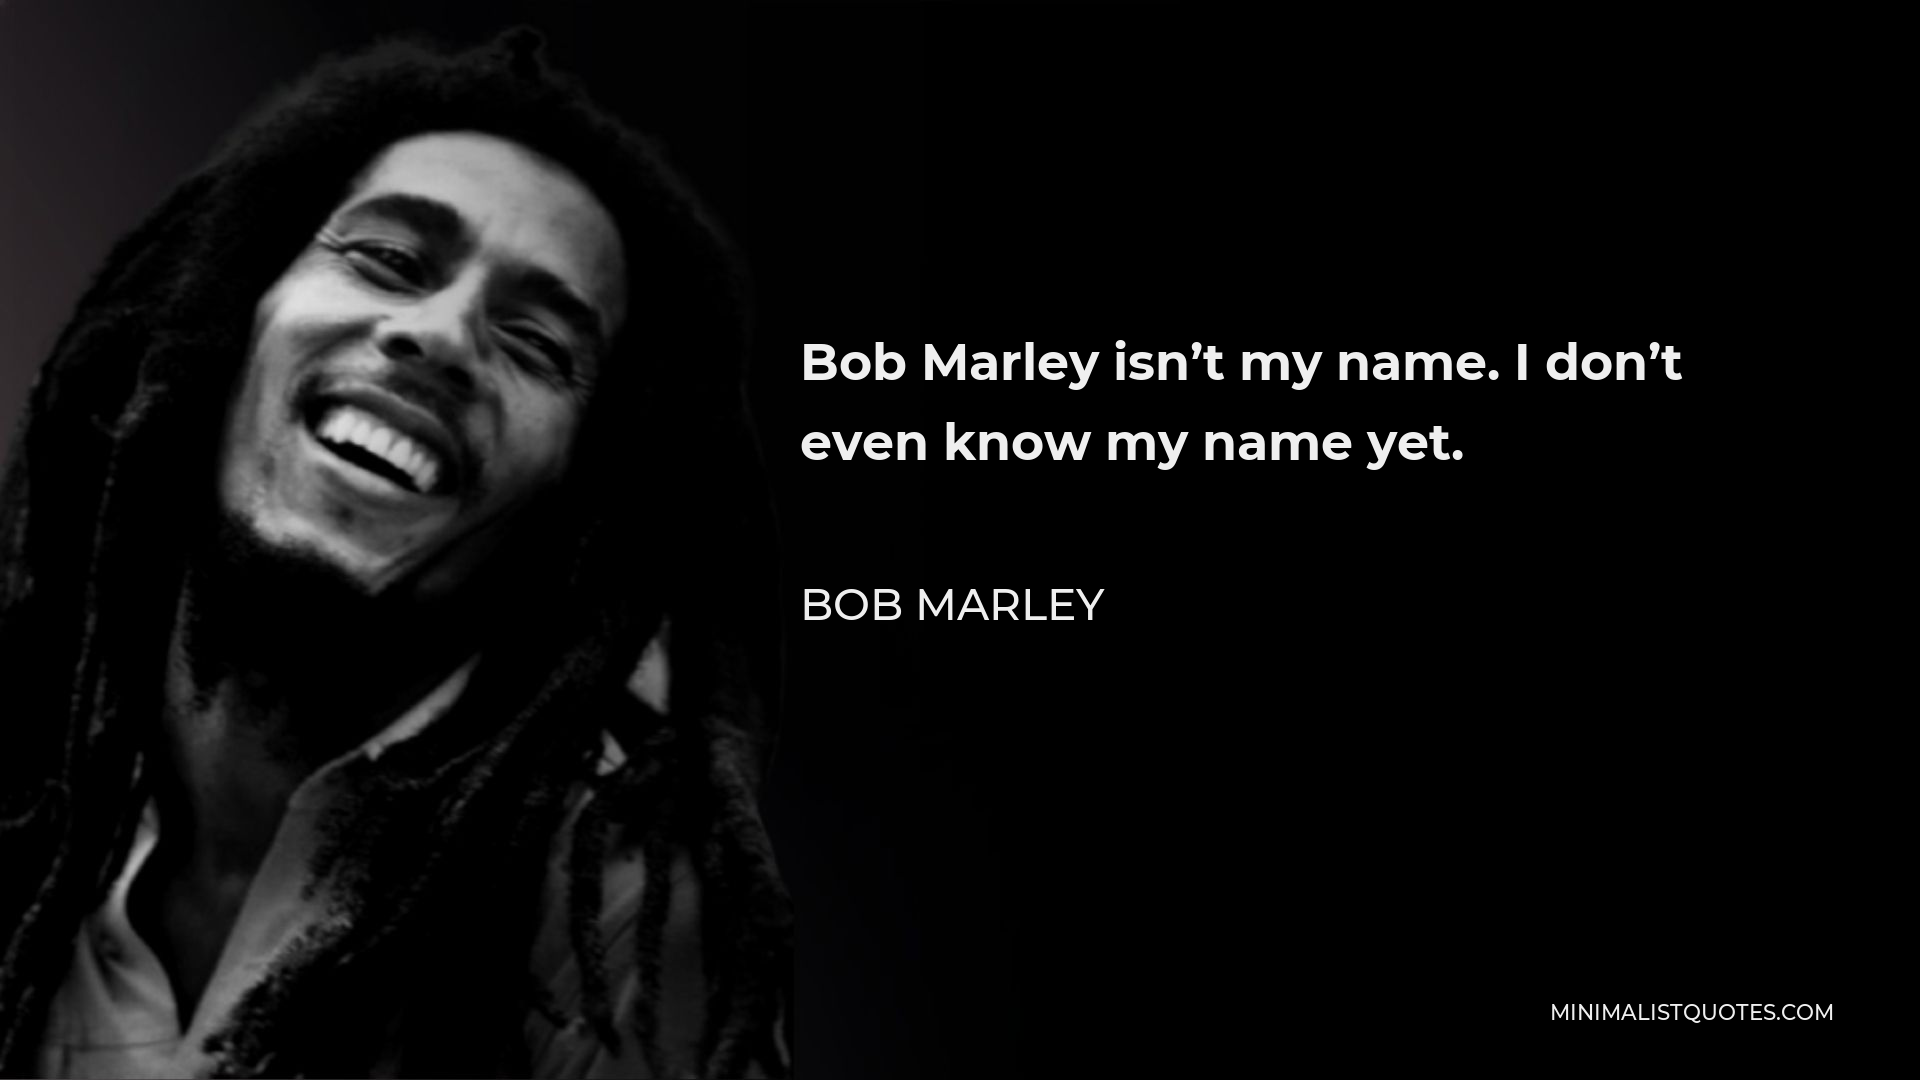 Bob Marley Quote - Bob Marley isn’t my name. I don’t even know my name yet.